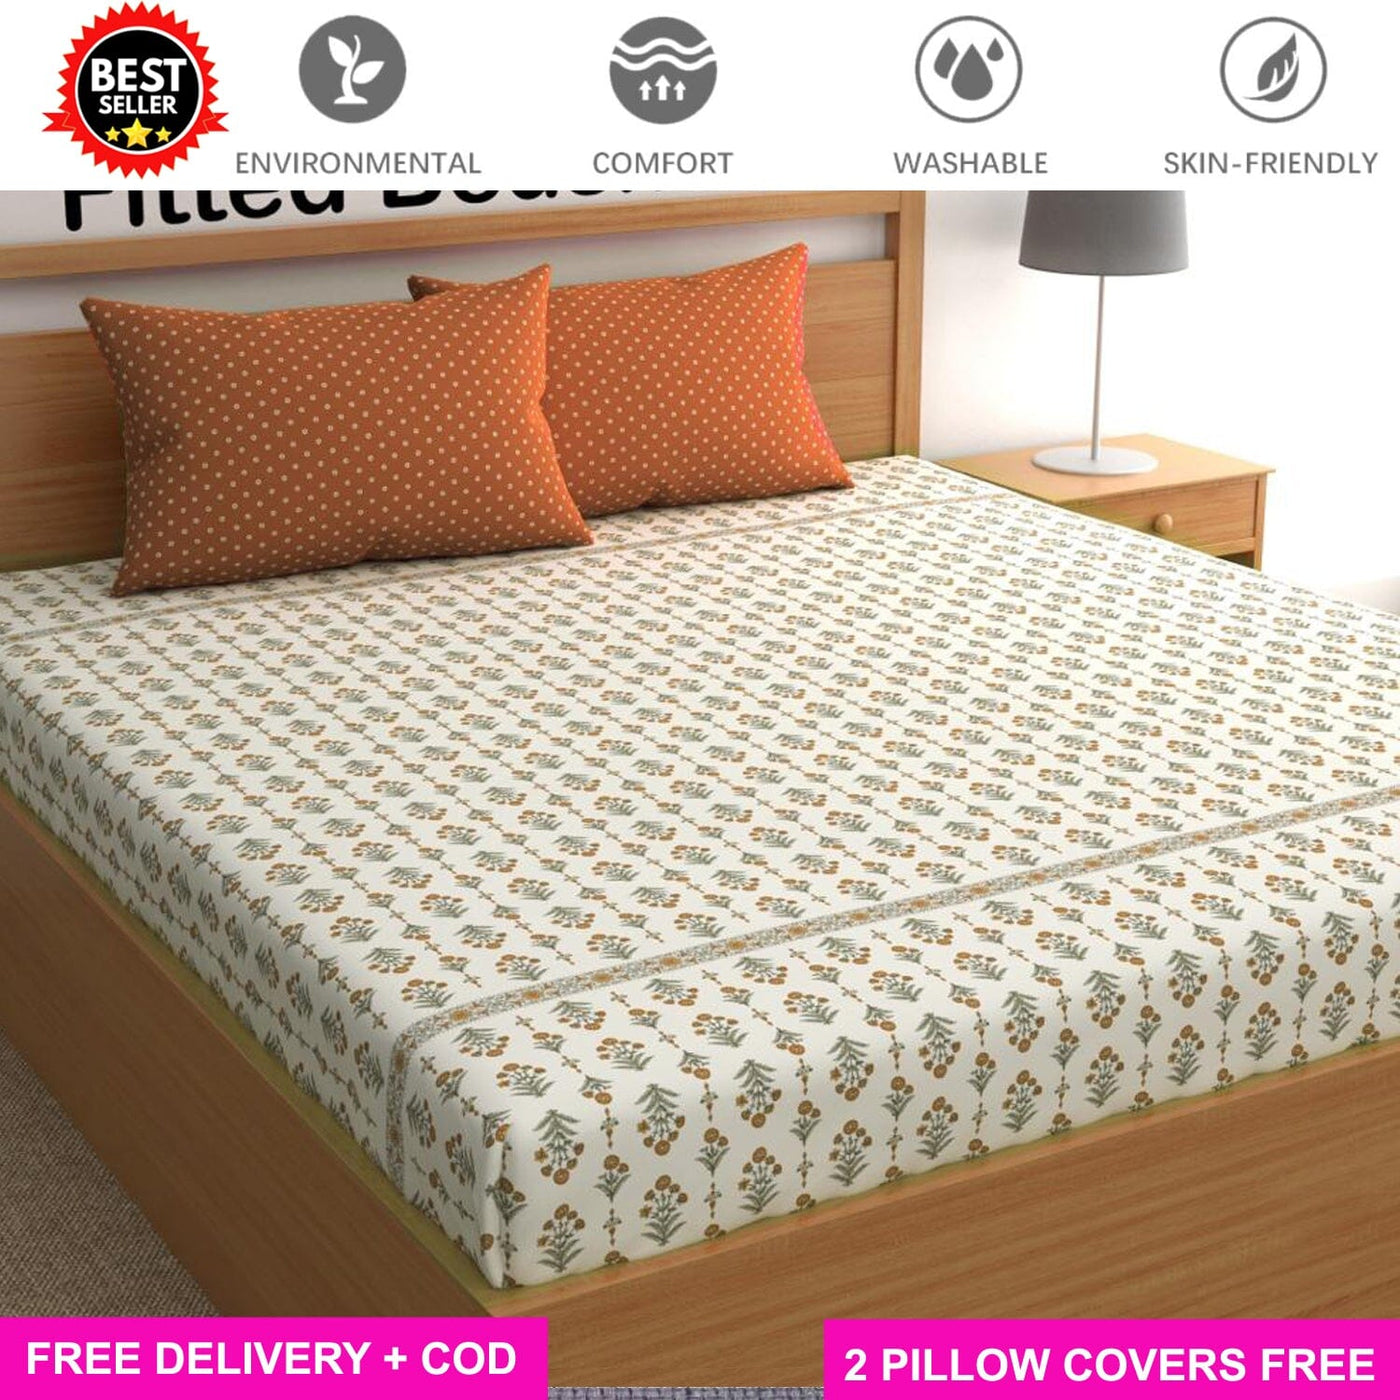 Orange Bail Contrast Full Elastic Fitted Bedsheet with 2 Pillow Covers - King Size Bed Sheets Great Happy IN 